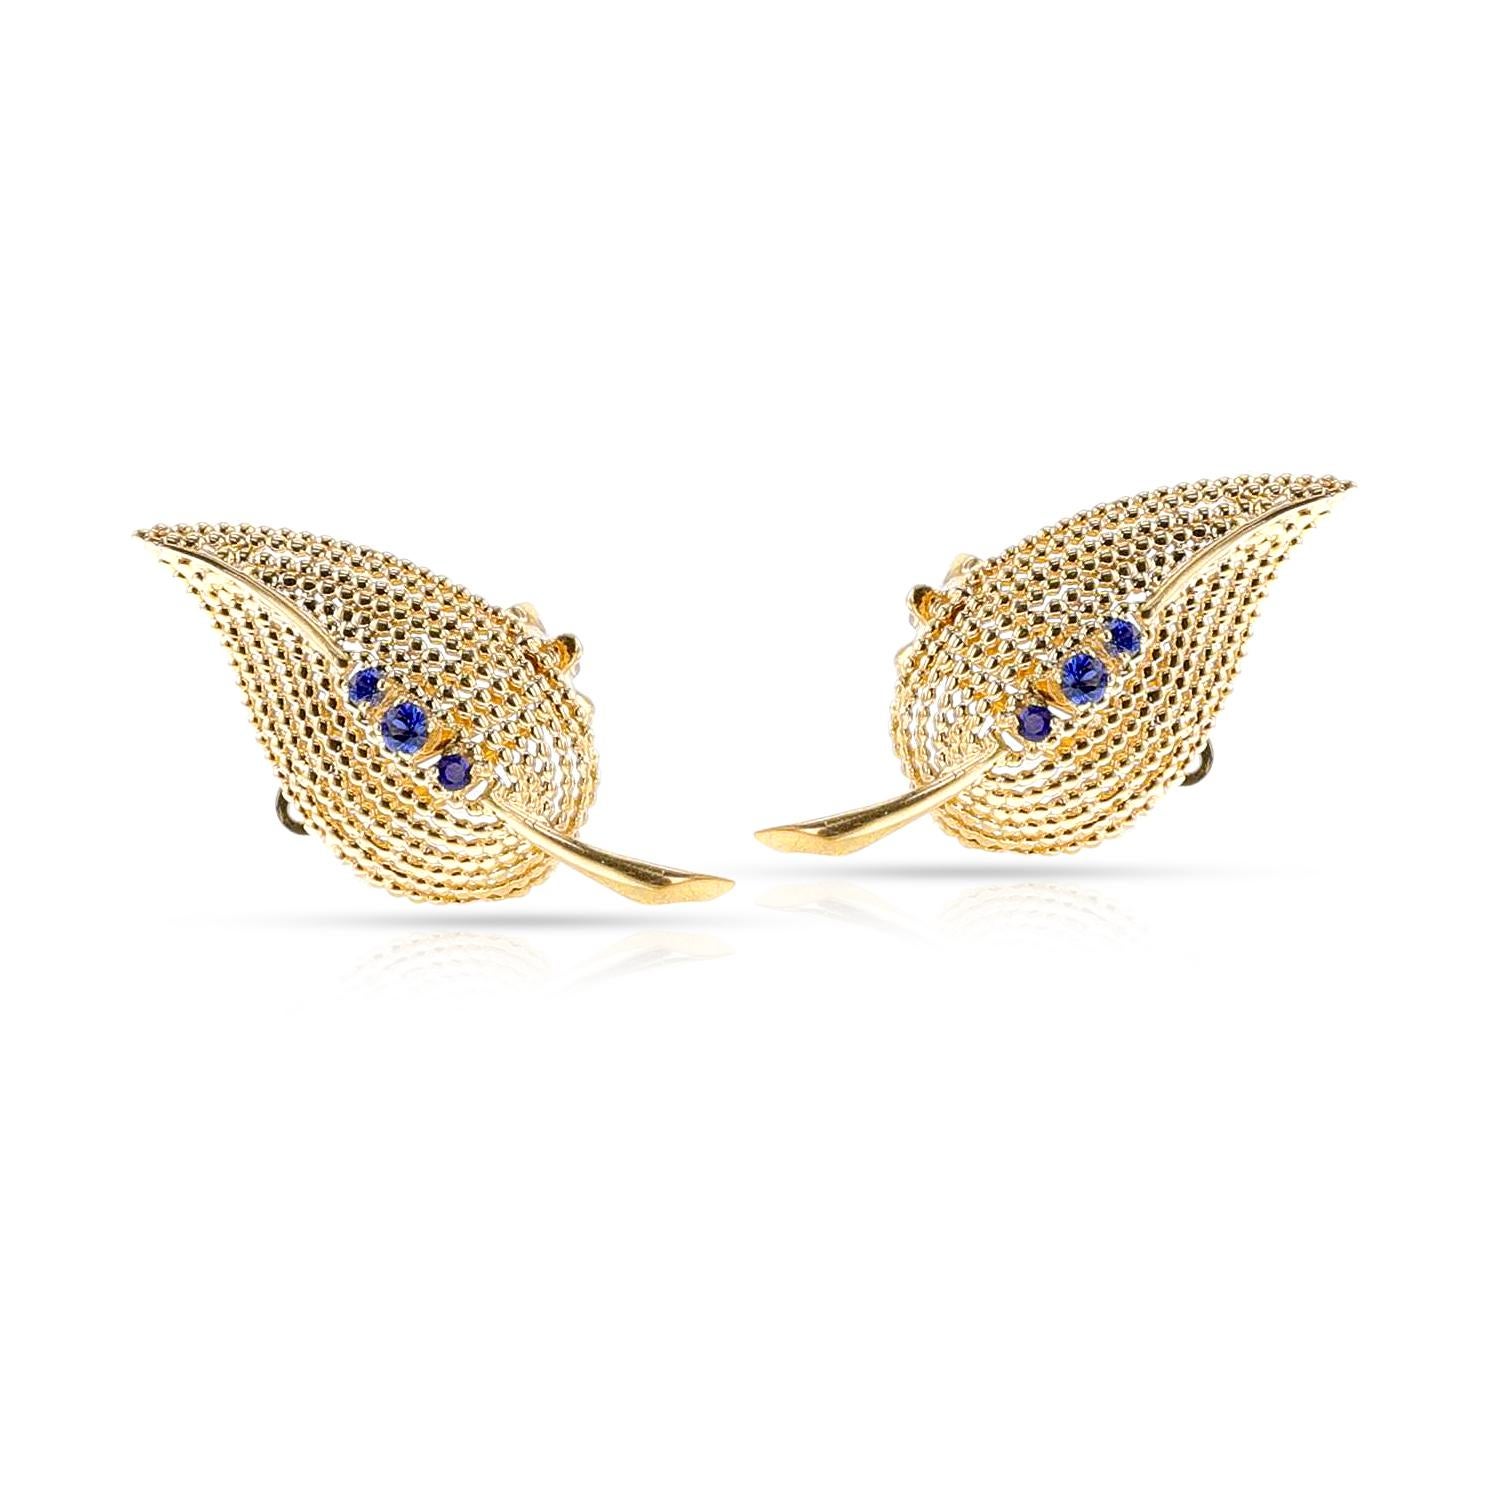 Tiffany & Co. Sapphire Leaf Earrings, 18k In Excellent Condition For Sale In New York, NY